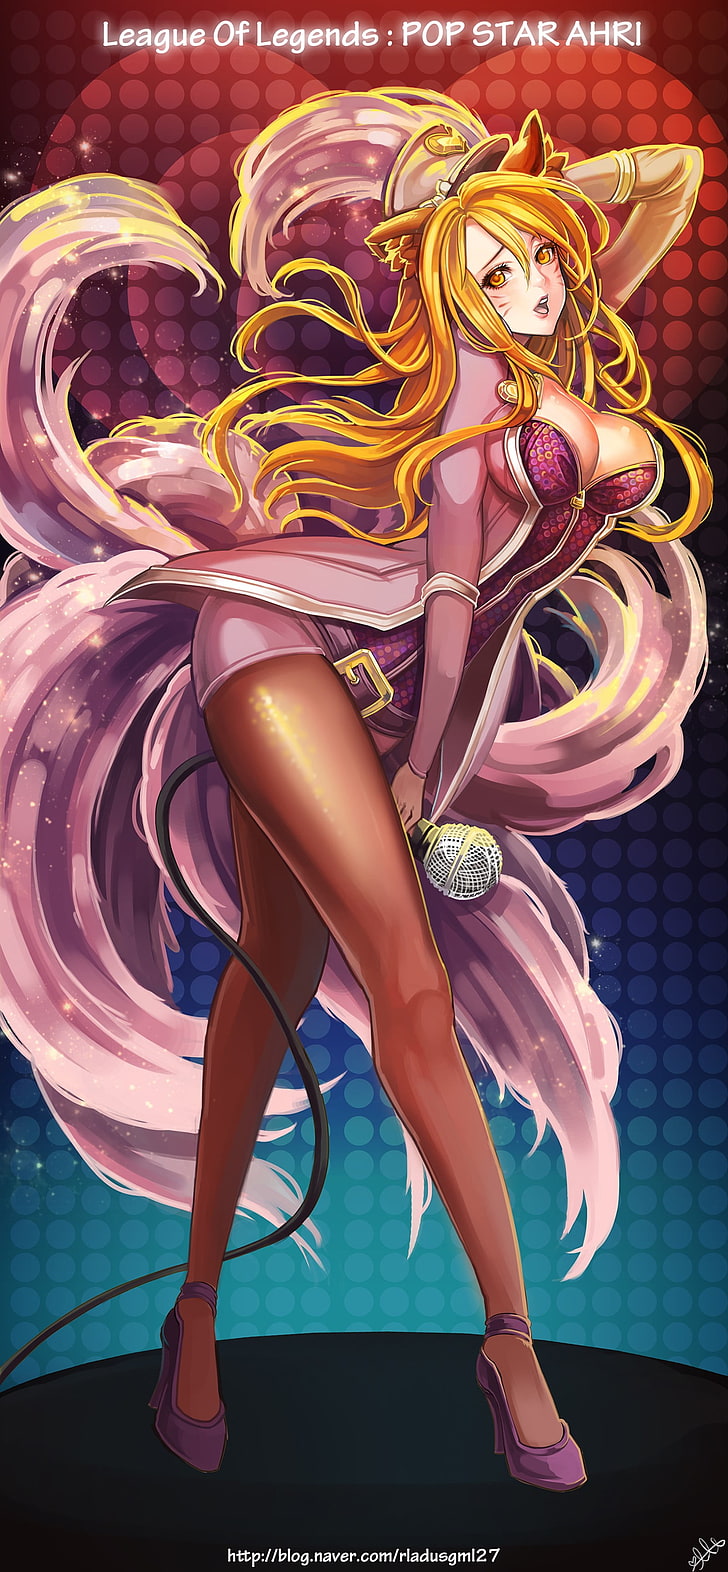 tail, women, Ahri, League of Legends, clothing, multi colored